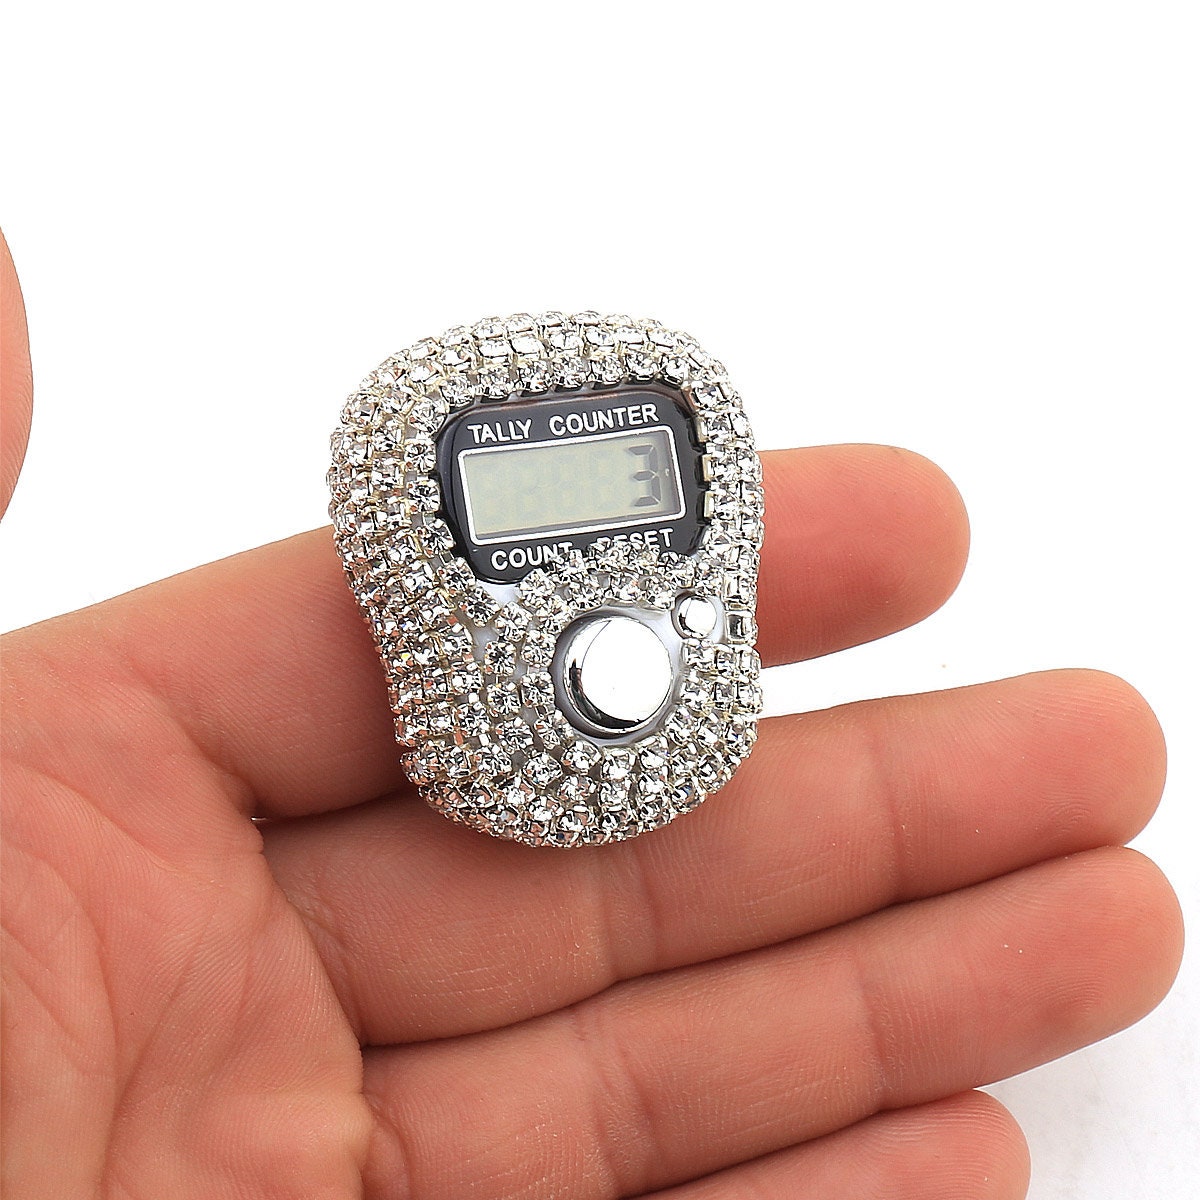 Tasbih Tally Counter for Muslims Zikr Ring Digital Tasbeeh - Tasbeeh  Counter Muslim Tasbih Musulman Electric Counter Zirconium